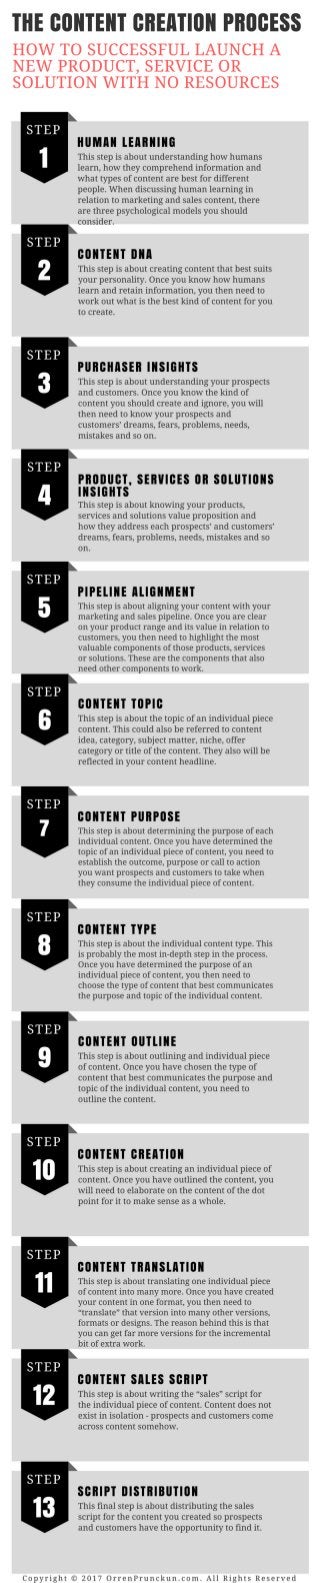 The Content Creation Process Infographic